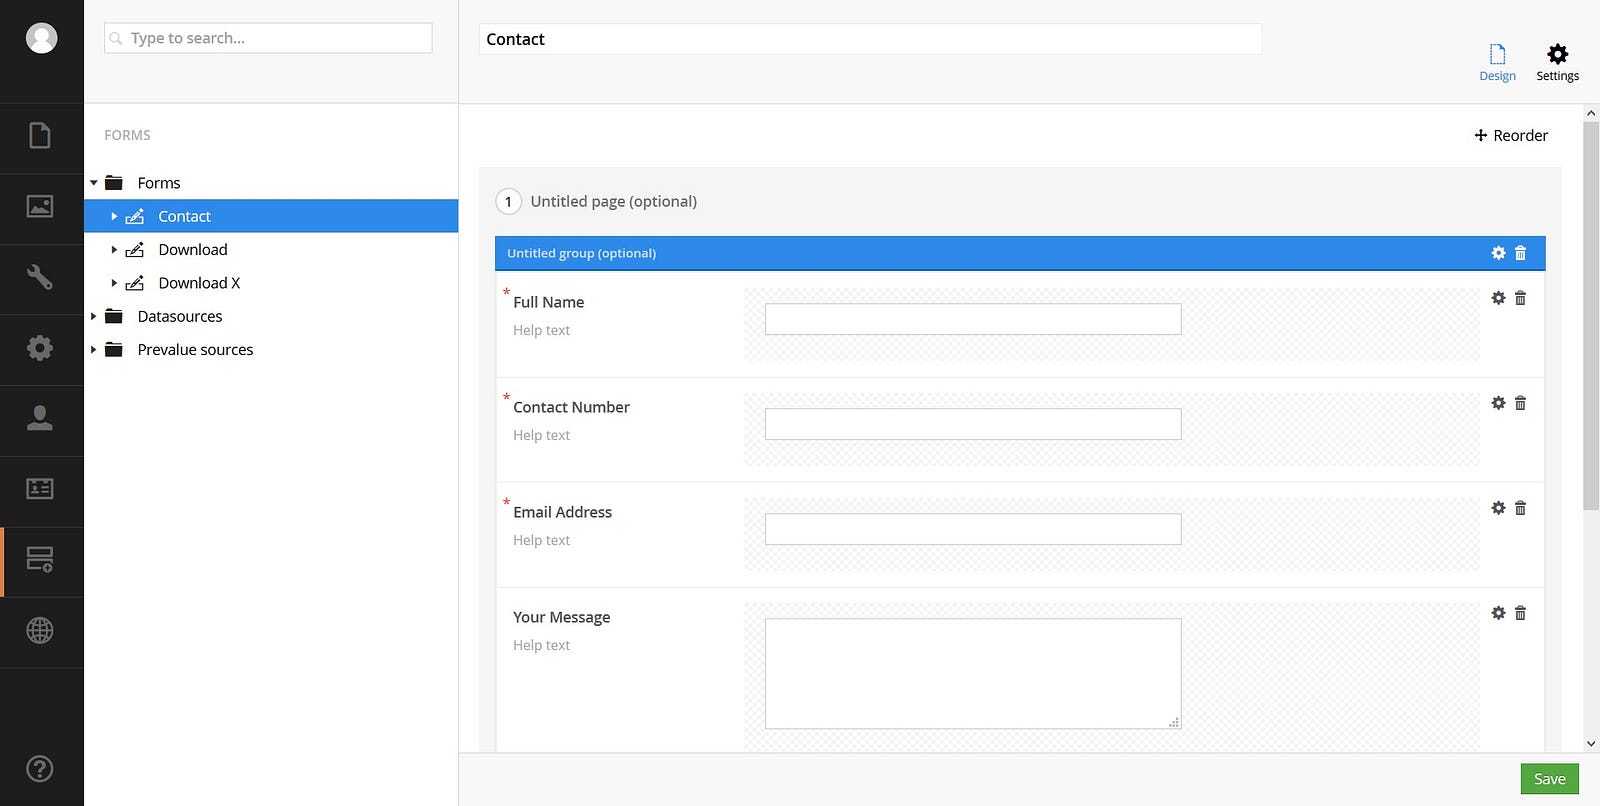 The picture shows a screenshot of the Umbraco backend